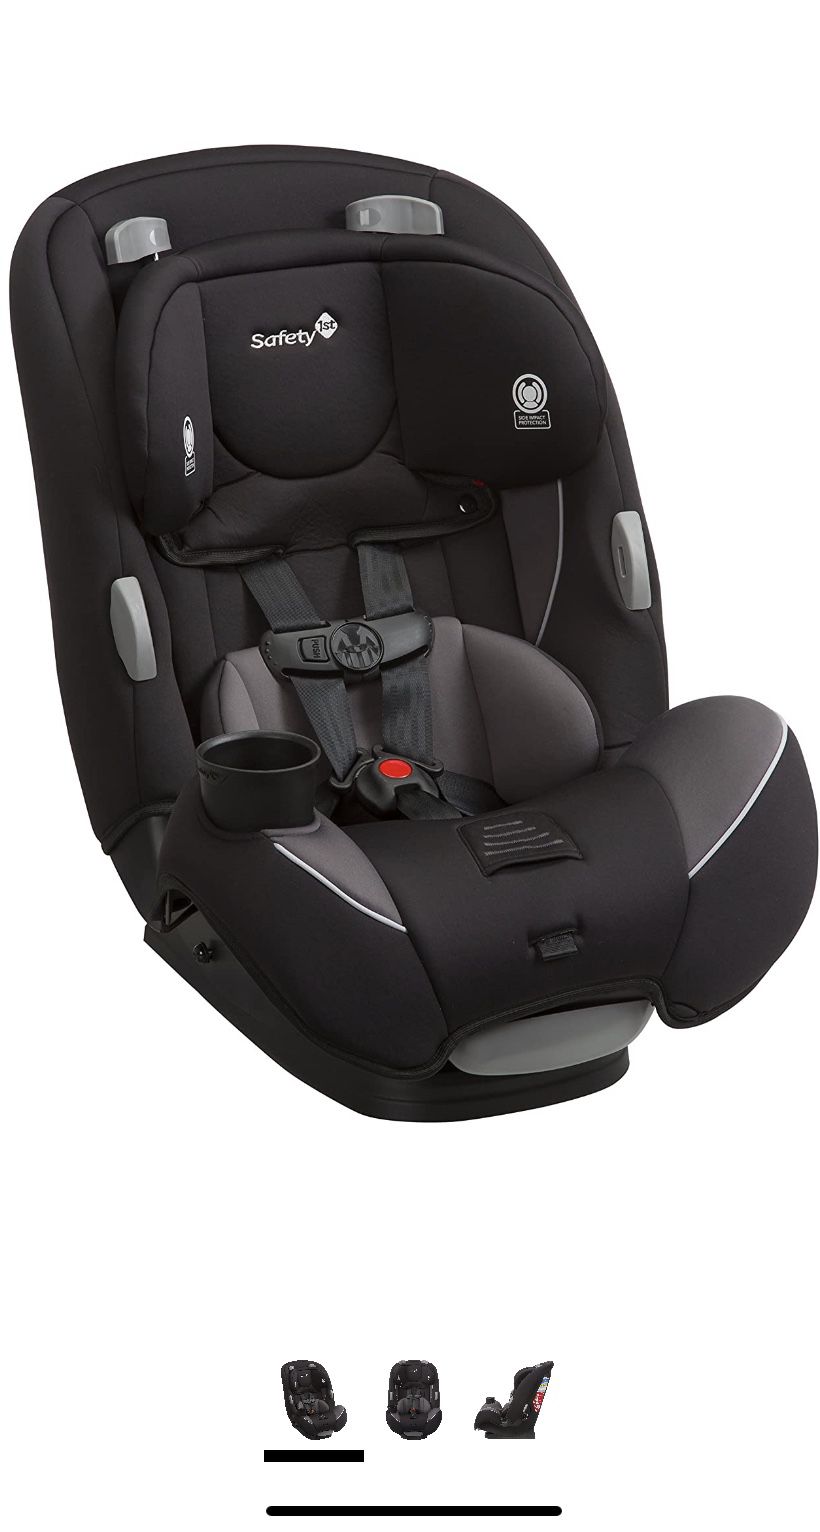 New safety 1st car seat